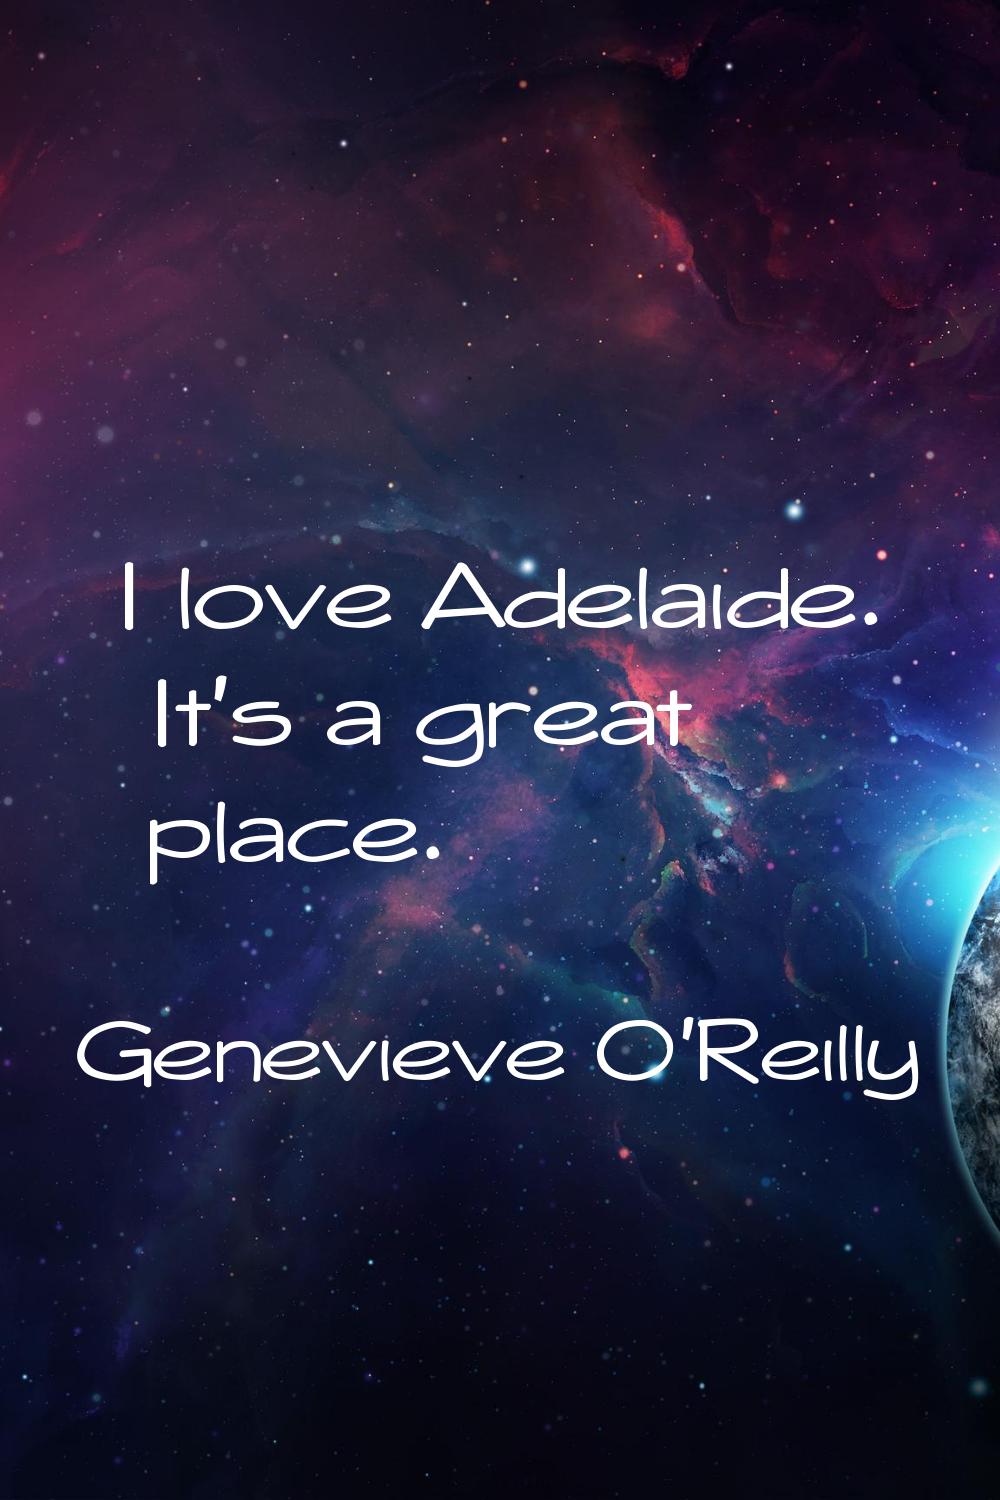 I love Adelaide. It's a great place.